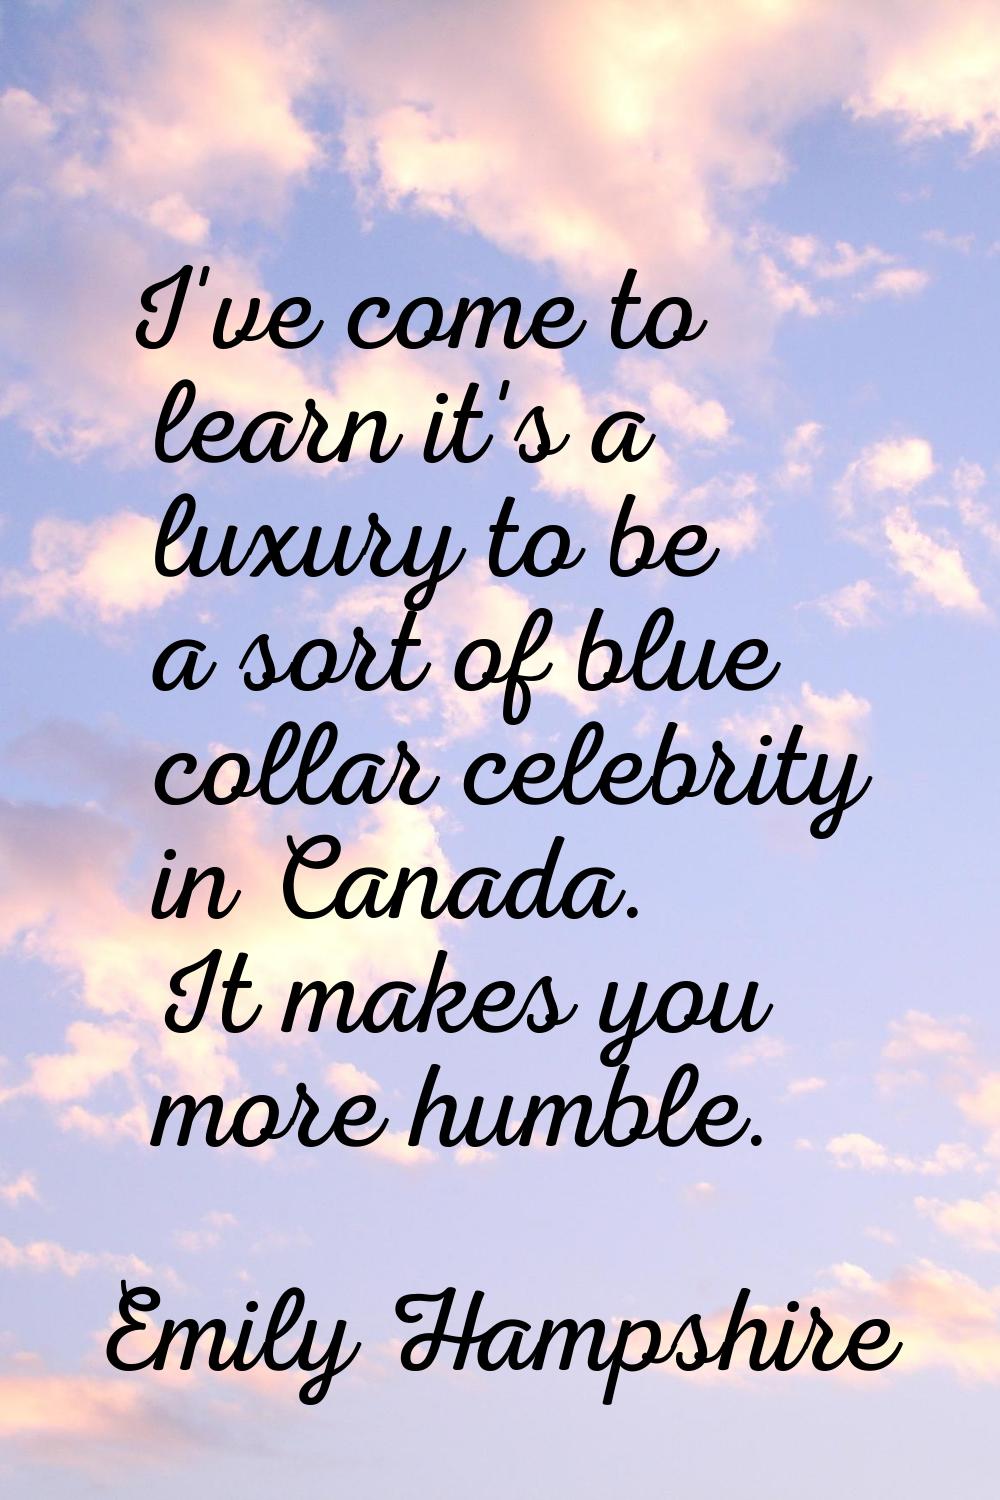 I've come to learn it's a luxury to be a sort of blue collar celebrity in Canada. It makes you more